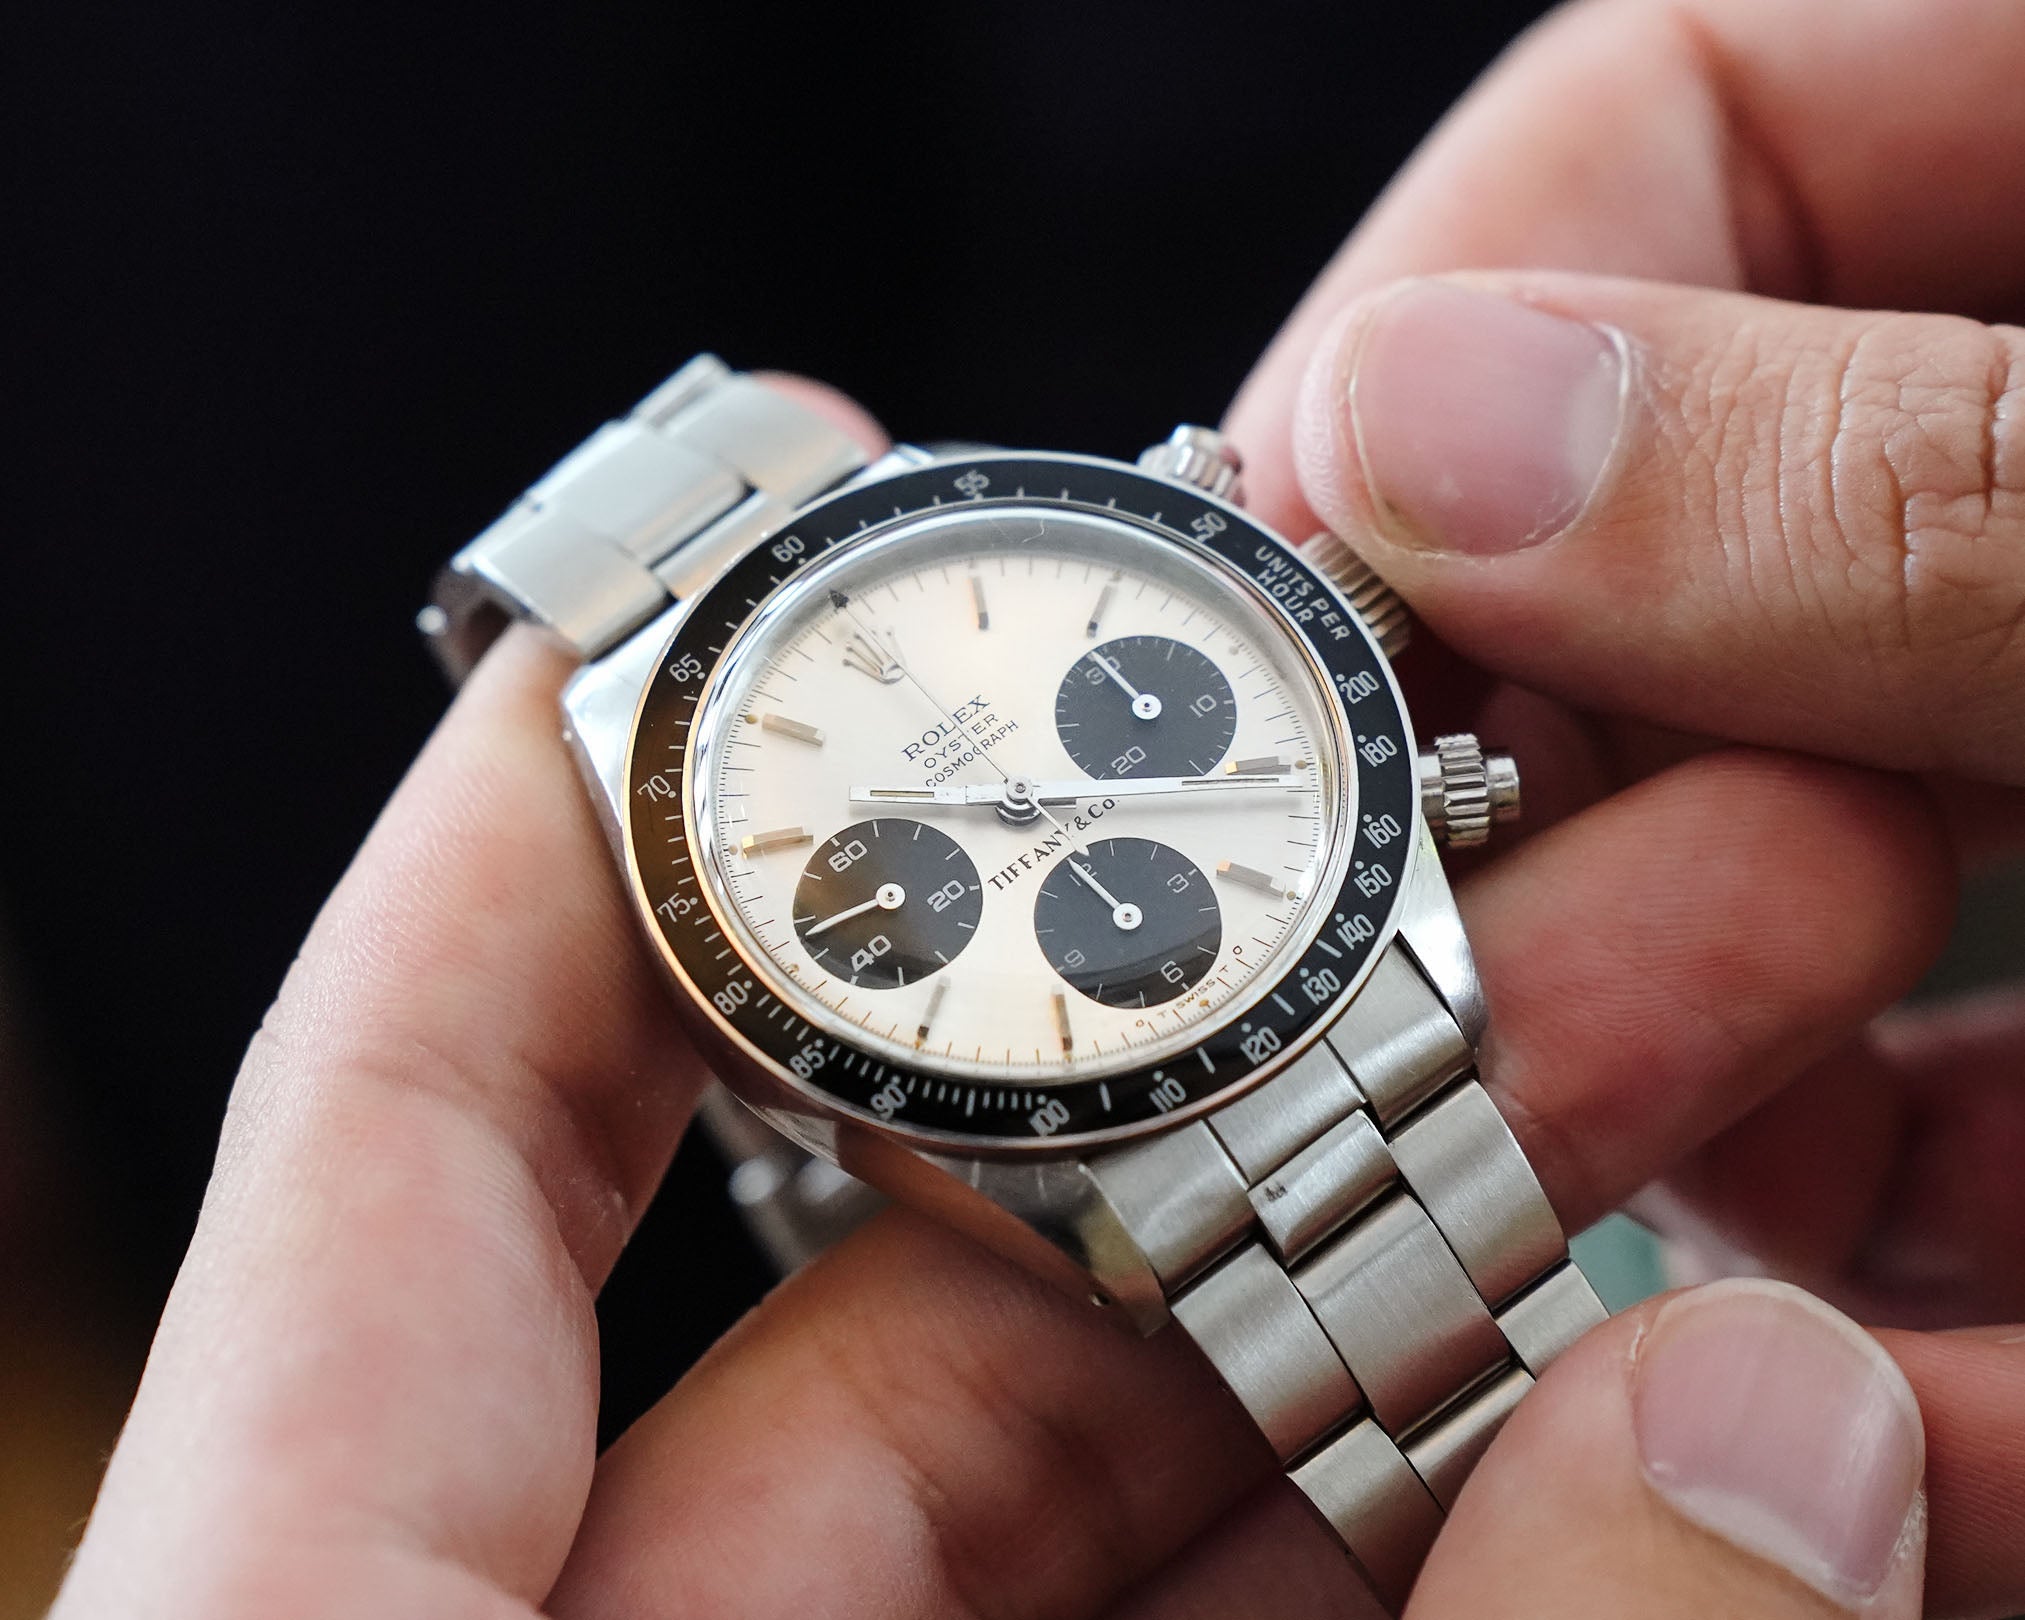 Rolex 6263 Tiffany & Co Dial Daytona at Rolliefest 2023 in New York